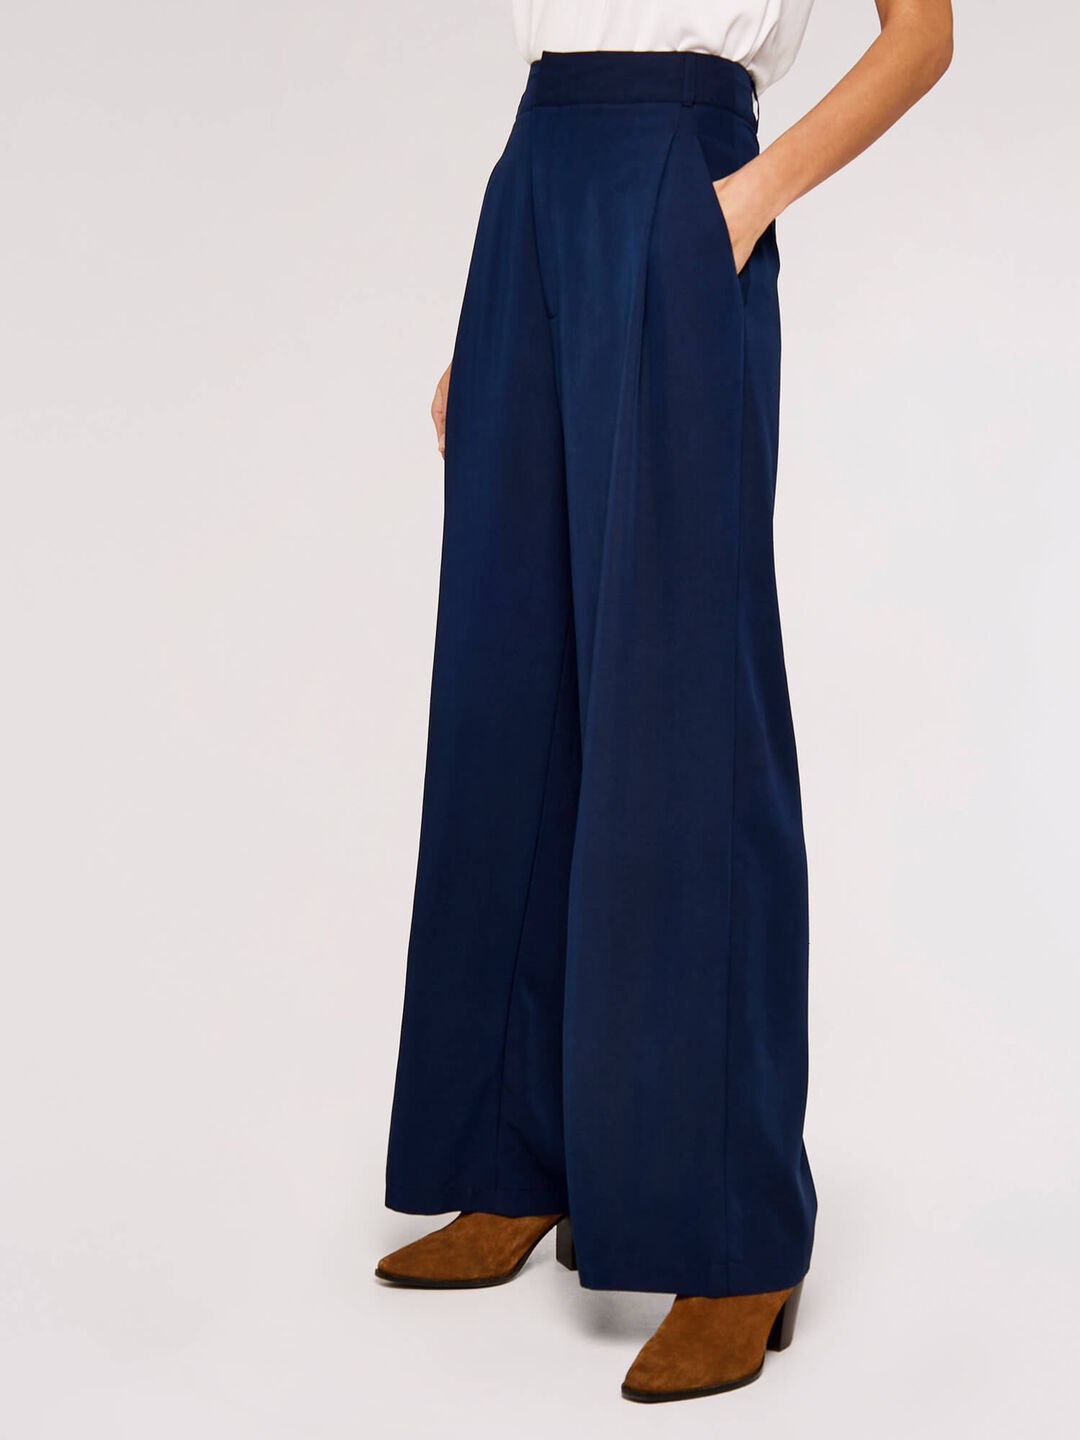 Sucolan Apricot Wide Leg Palazzo Pants for Women Business Casual